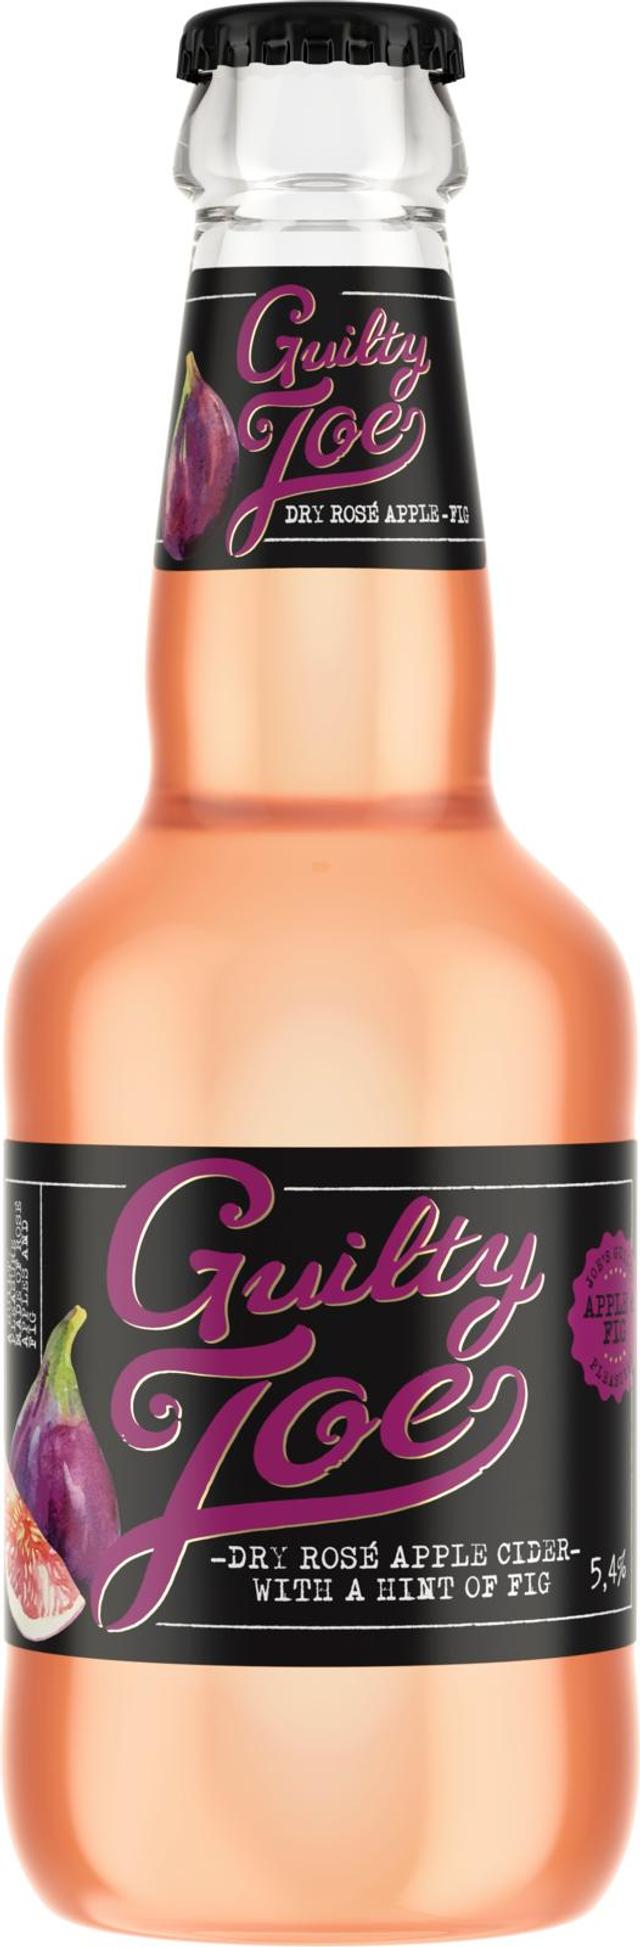 Happy Joe Guilty Joe Dry Rose Apple with a hint of Fig siideri 5,4% 0,275 l